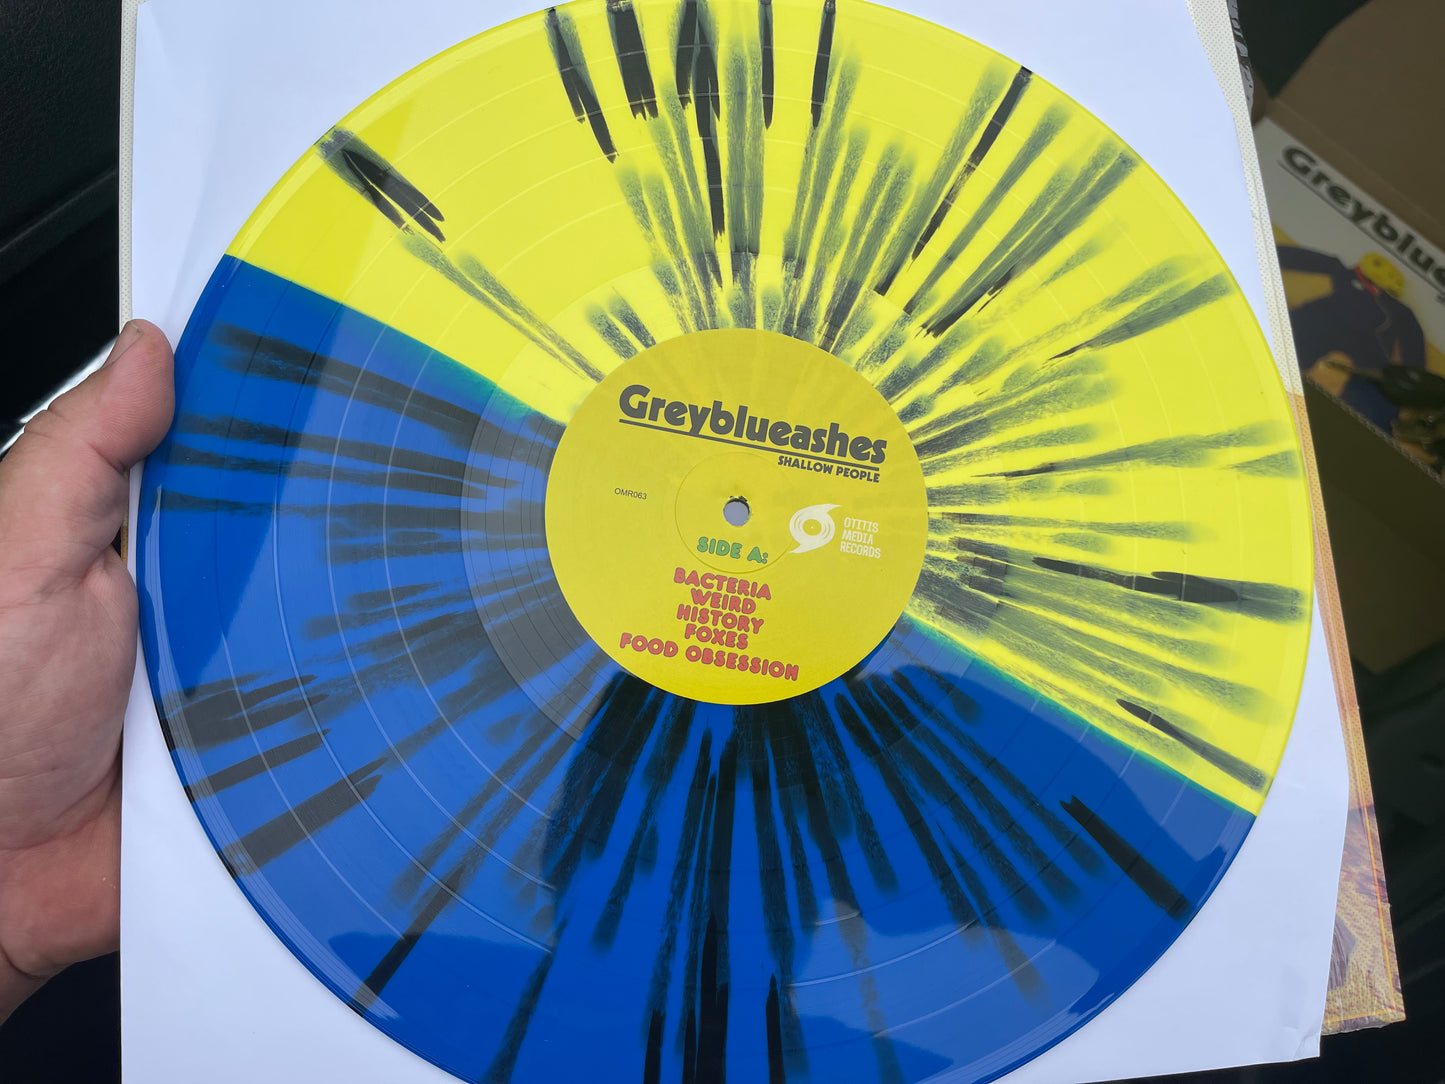 OMR-063 Greyblueashes “Shallow People” LP